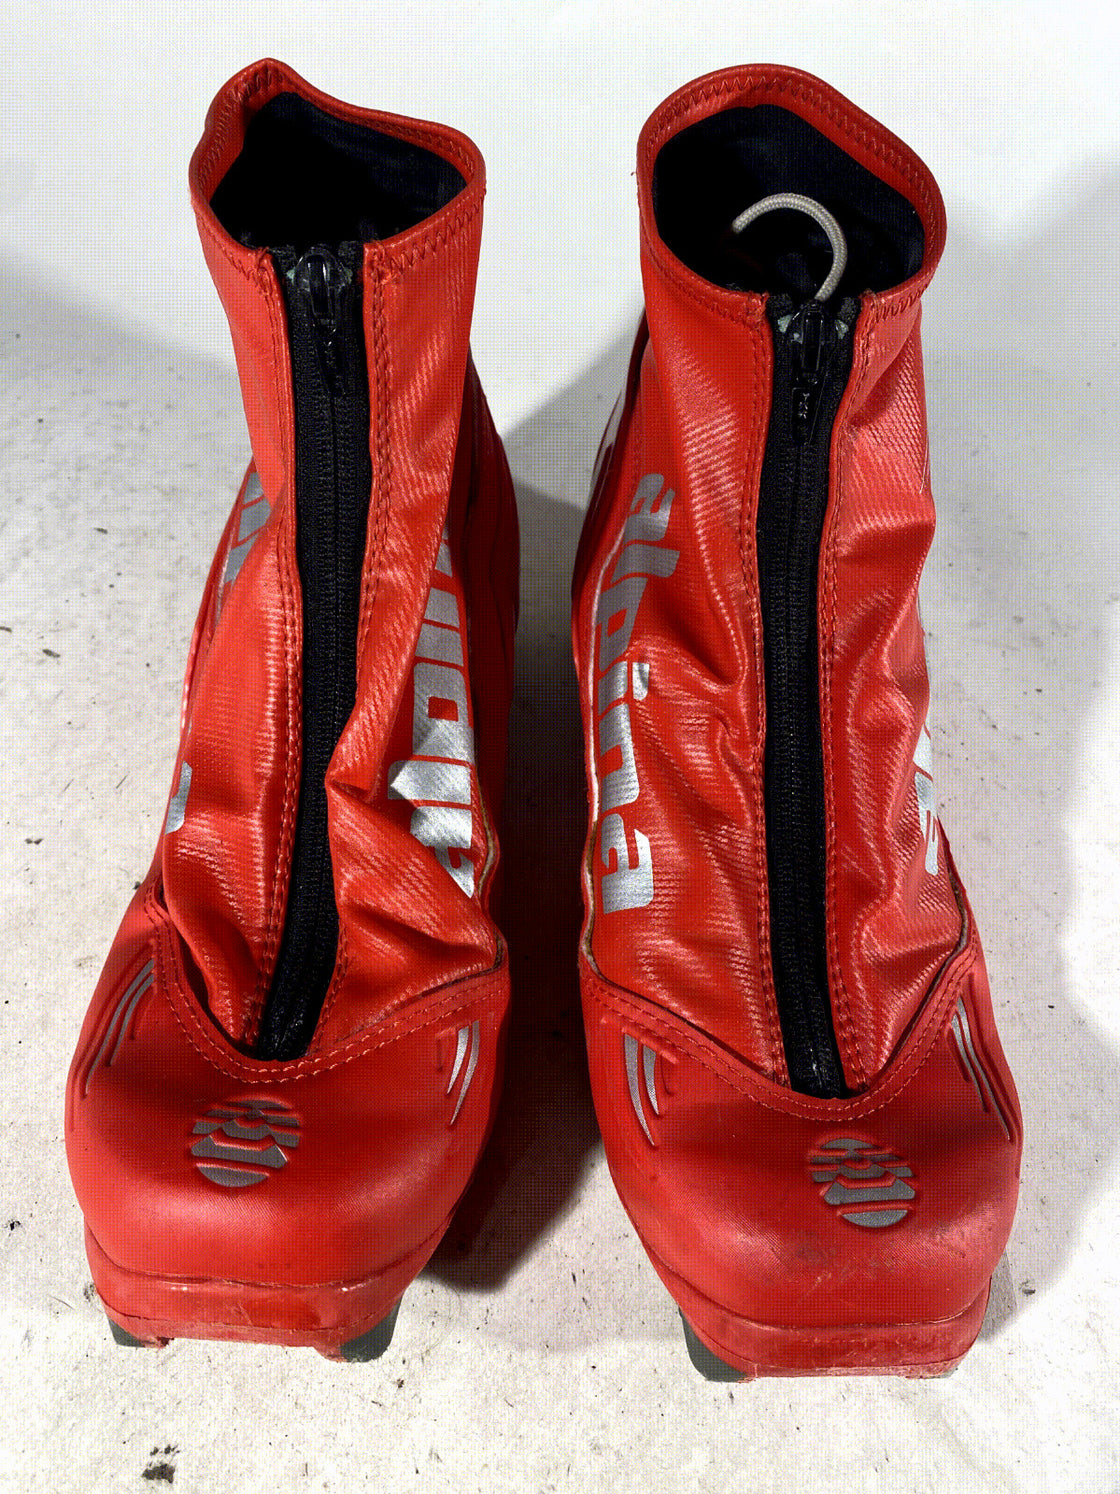 Alpina SCL Racing Nordic Cross Country Ski Boots Size EU43 US9.5 for NNN